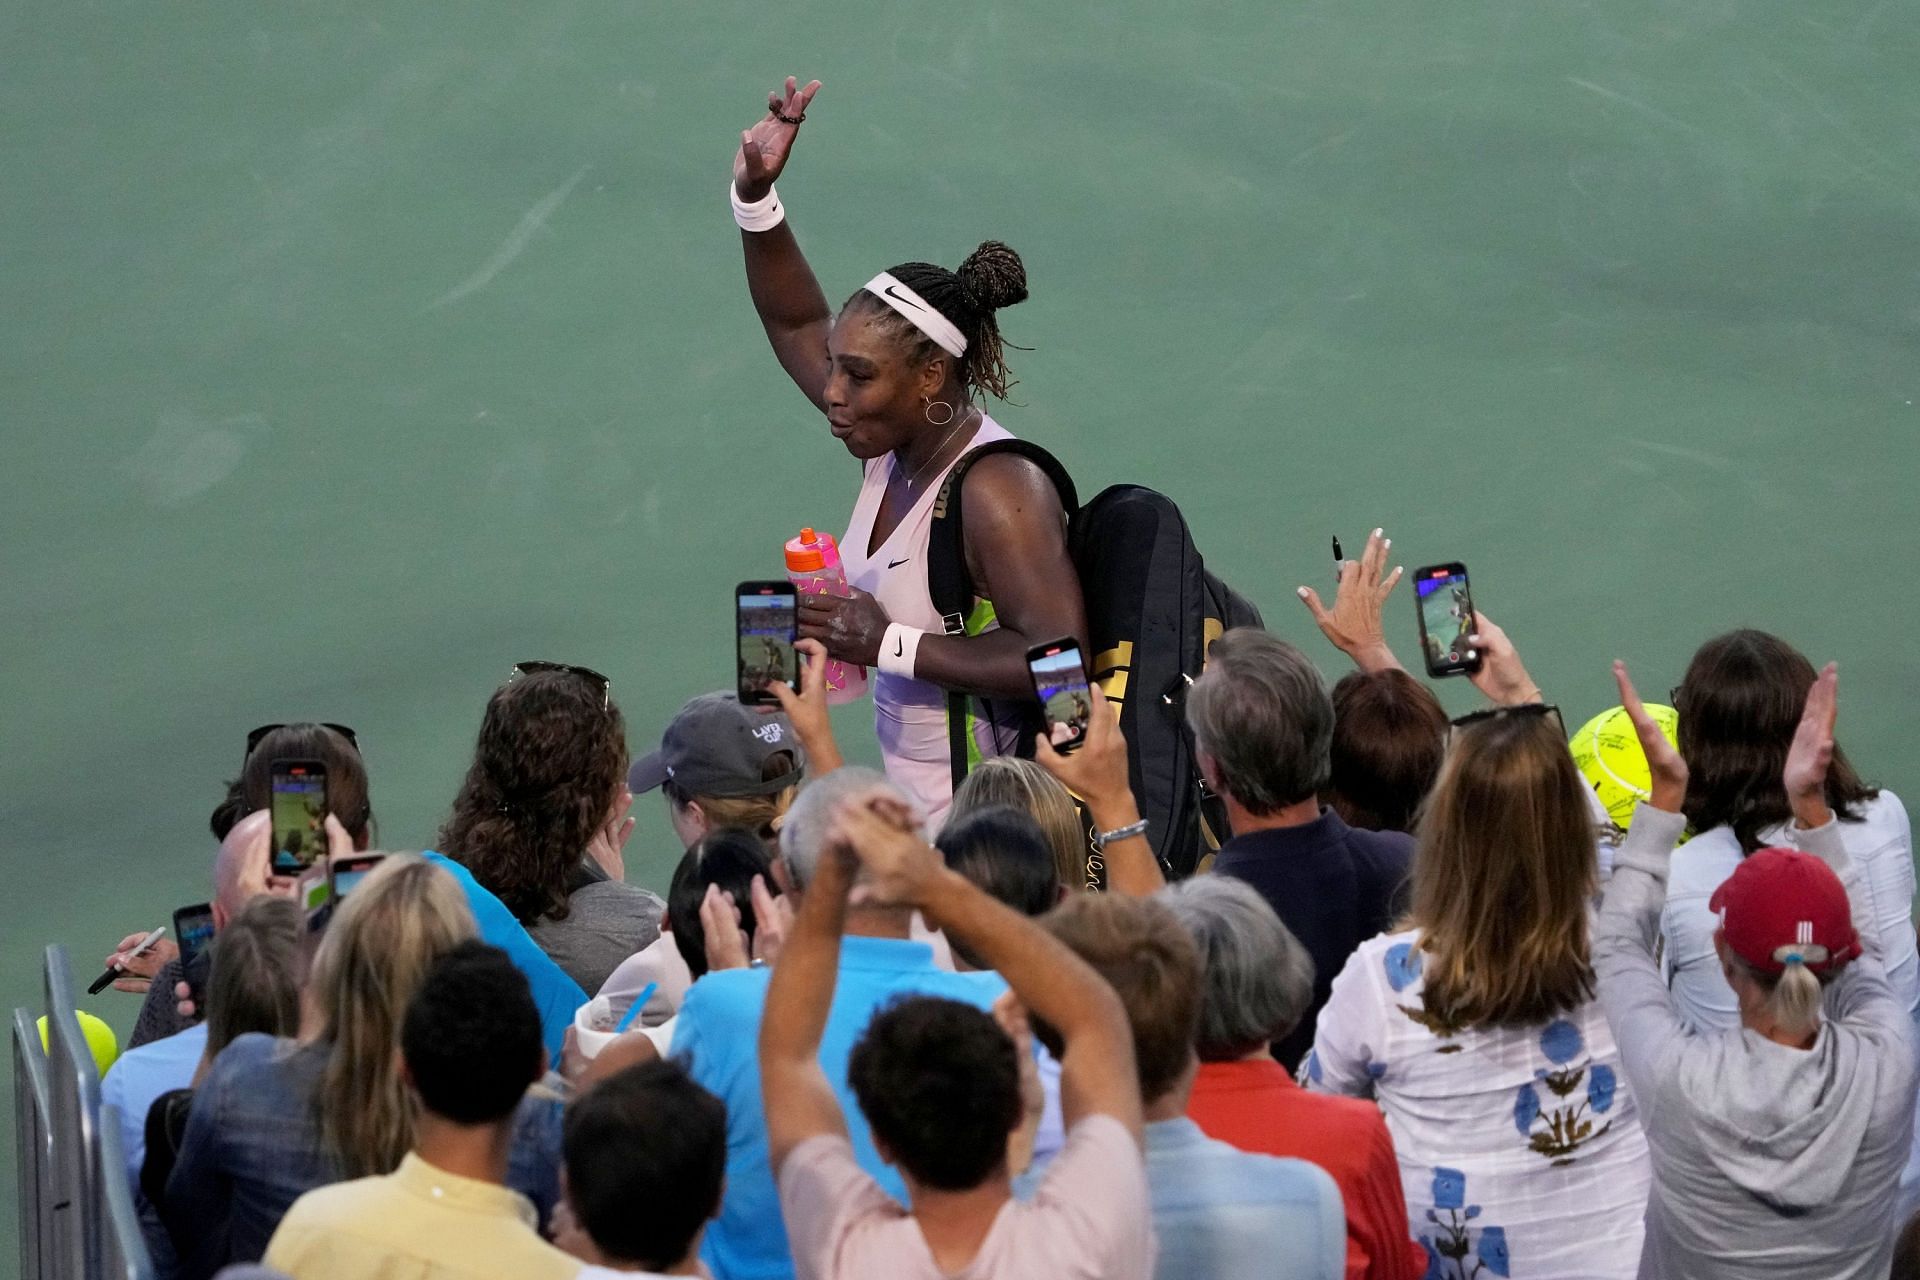 Serena Williams to retire after the US Open